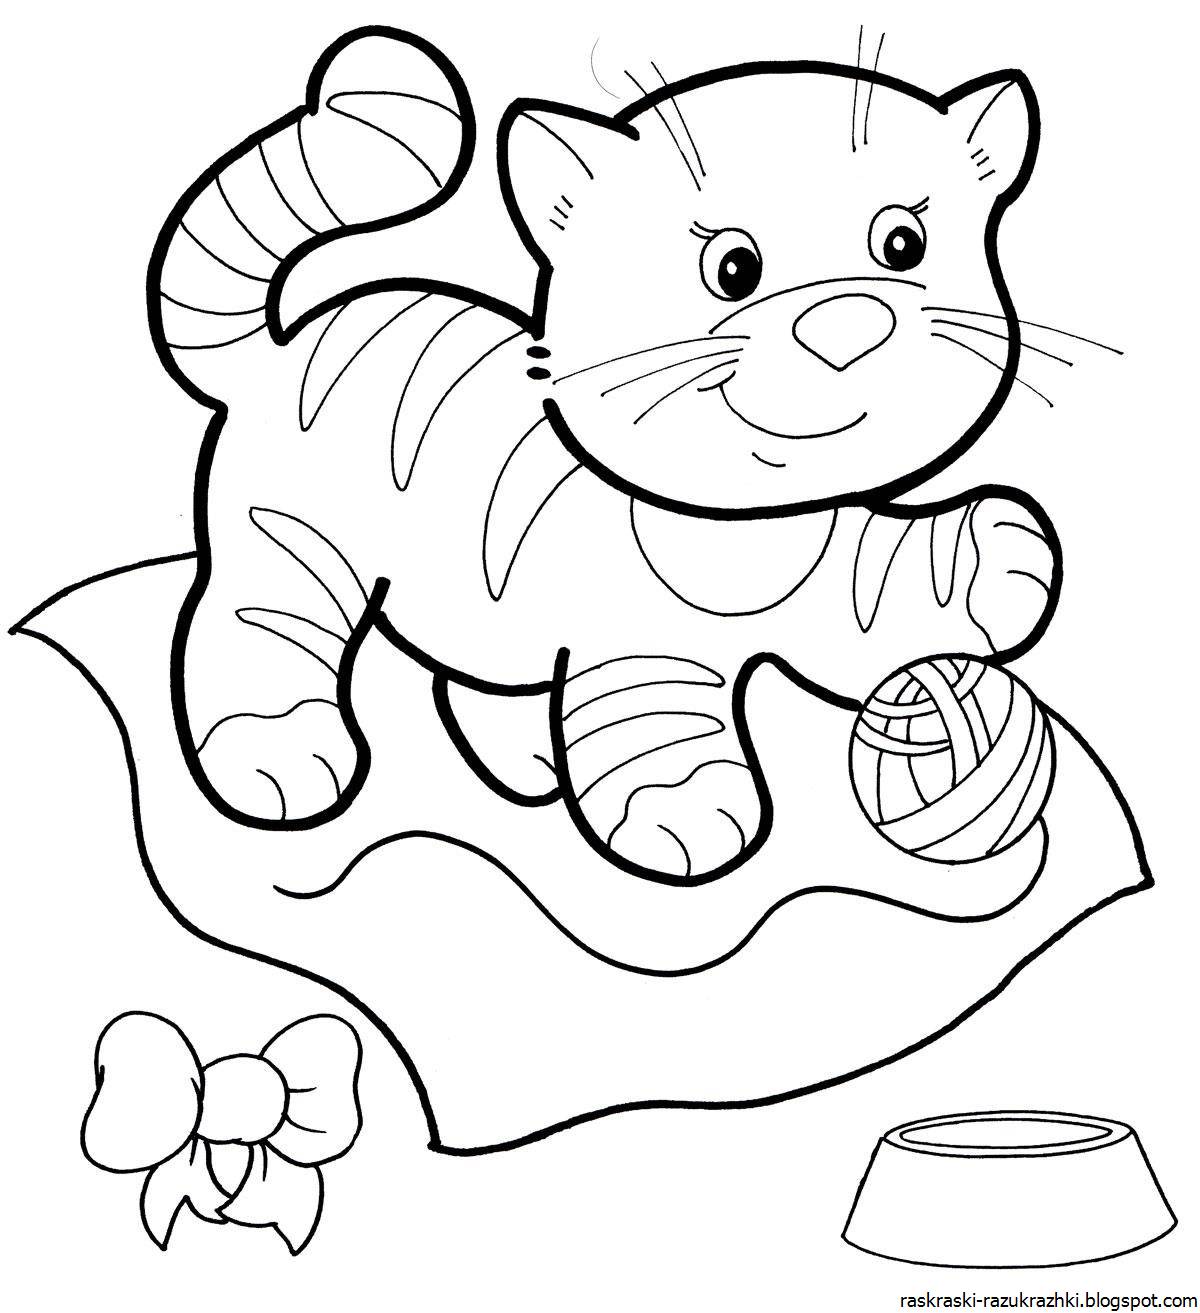 Adorable kitten coloring book for kids